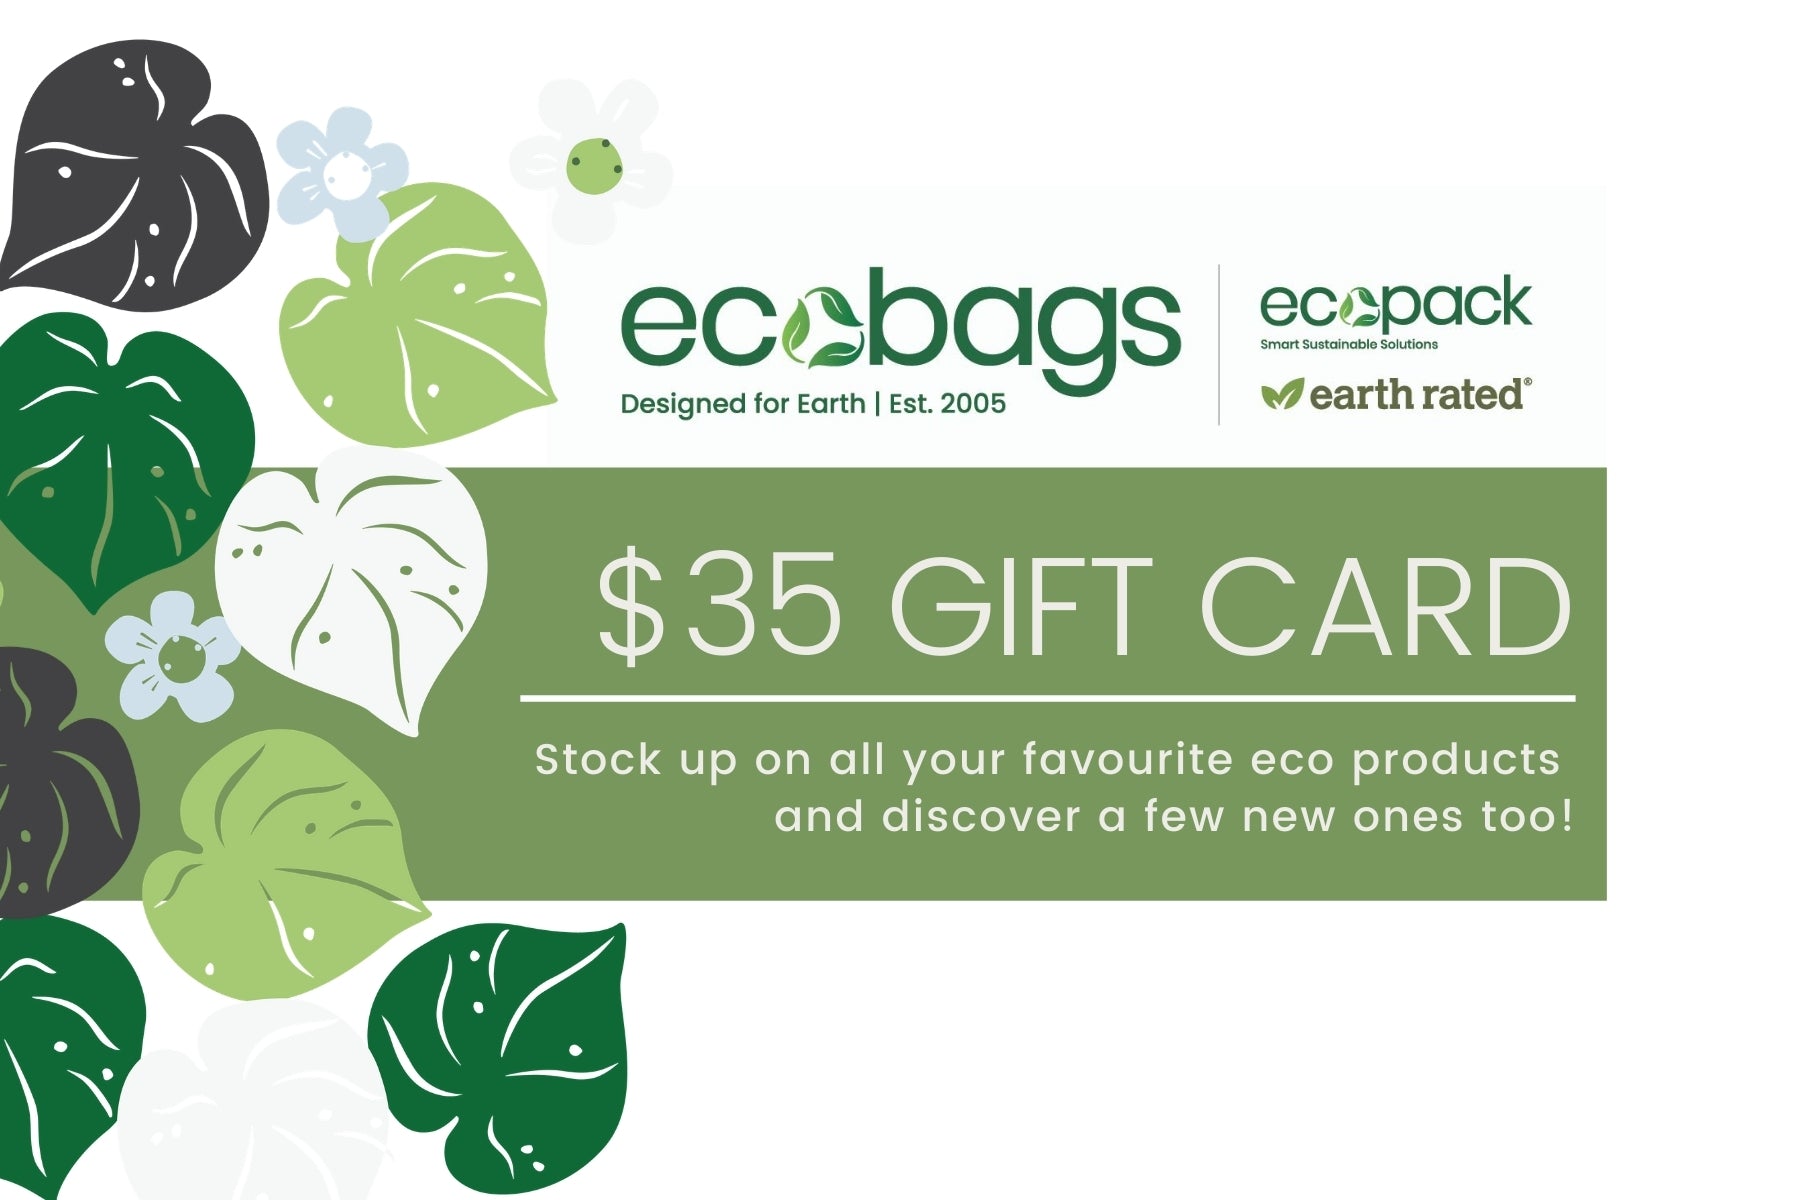 Ecobags Gift Card